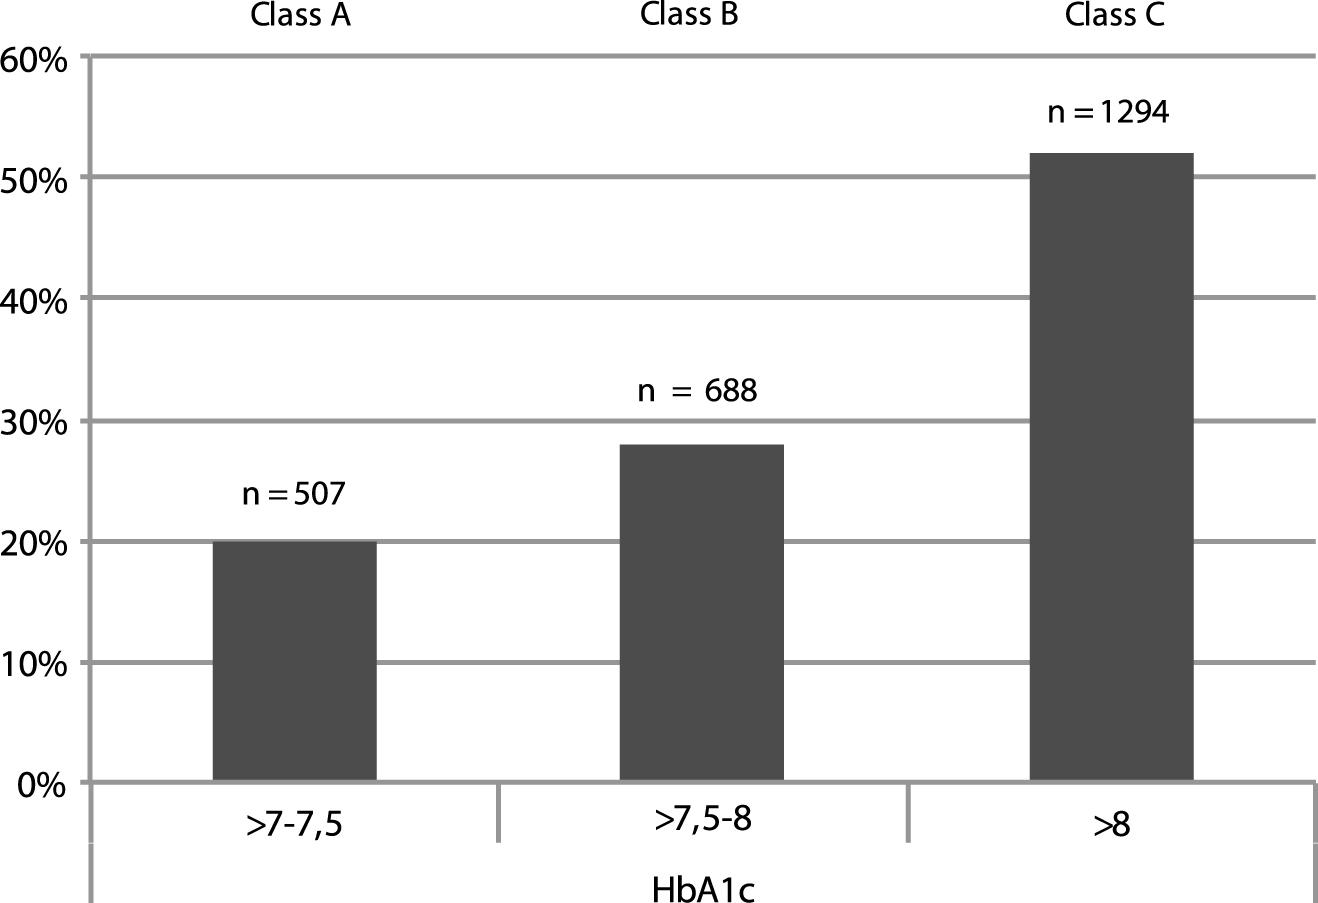 Distribution of the absolute number (n) and percentage (%) of people with diabetes complications according to three arbitrarily chosen HbA1c ranges as observed at T0 (A, B, C). The highest rate of CV and other diabetes related complications was found in class C. See text for further details.